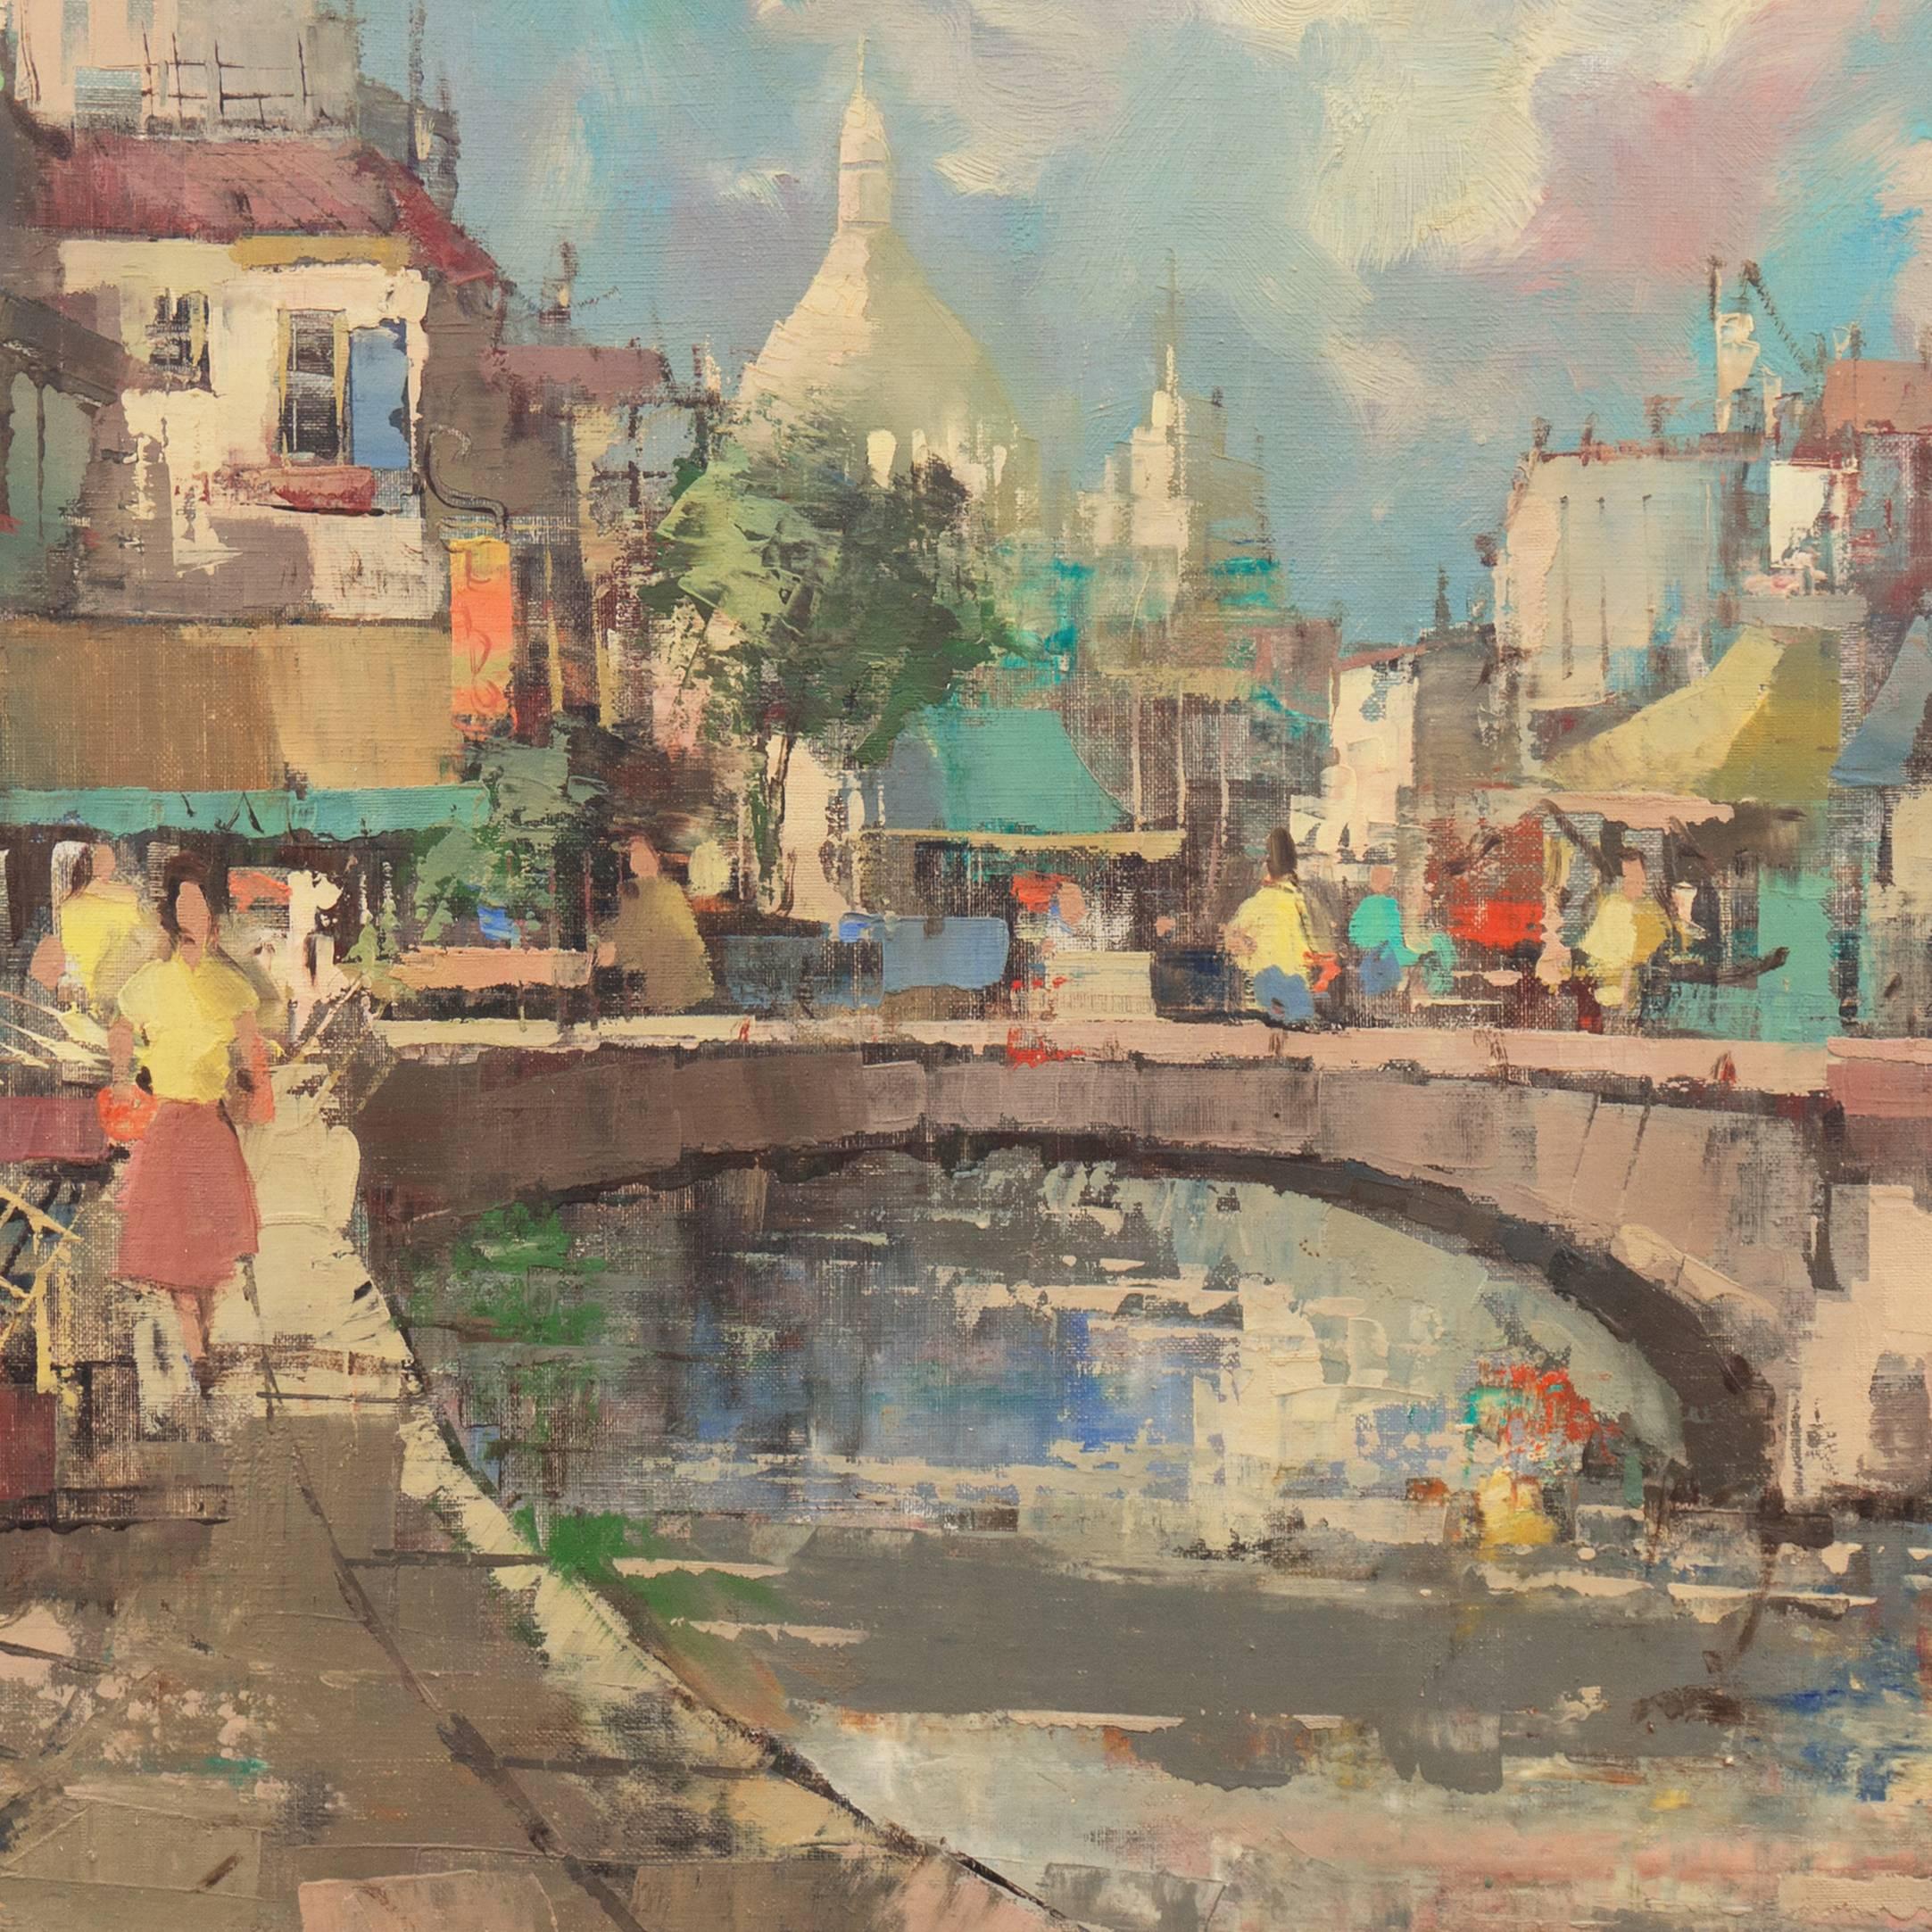 Signed lower right, 'P. Romier' for Paul Romier (French, b. 1919) and painted circa 1965.

Oil street scene showing a Paris market on the banks of the Seine with a fashionably dressed young woman walking beside a news vendor's stand. In the